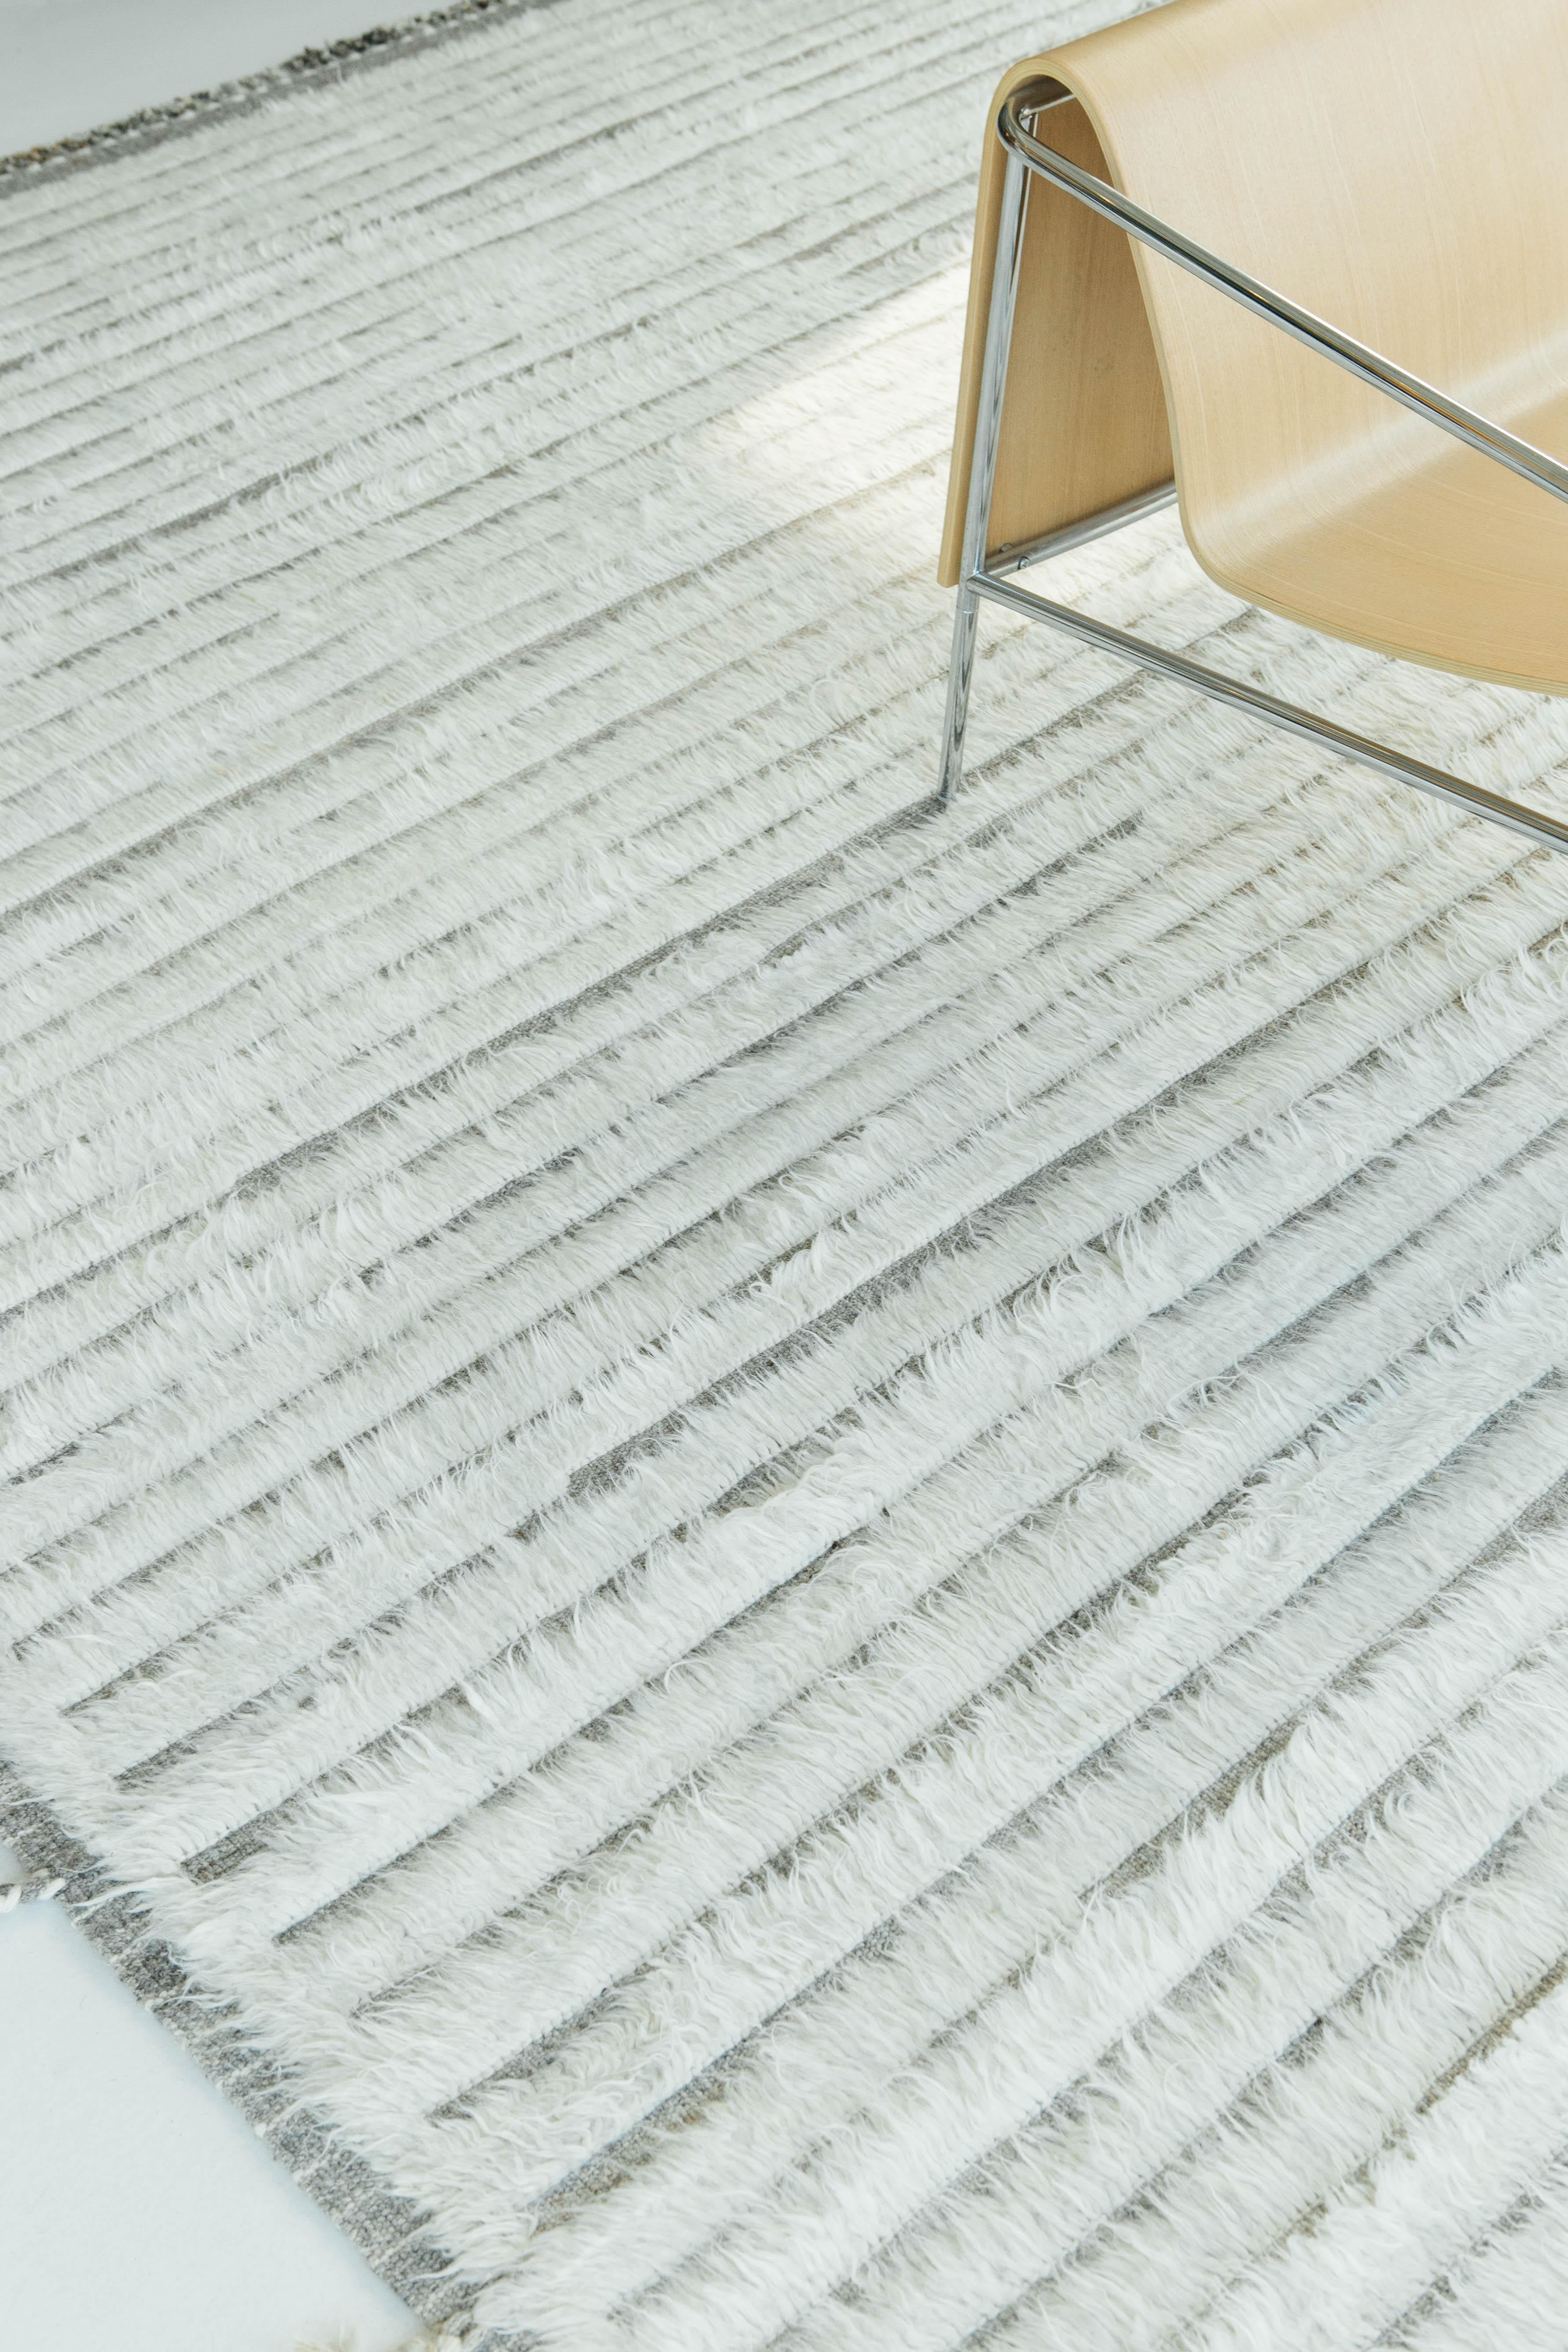 Shipca is a handwoven luxurious wool rug with timeless embossed detailing. In addition to its neutral earth-toned taupe flat weave, Shipca has a beautiful ivory shag that brings a lustrous and contemporary feel to one's space. The Haute Bohemian